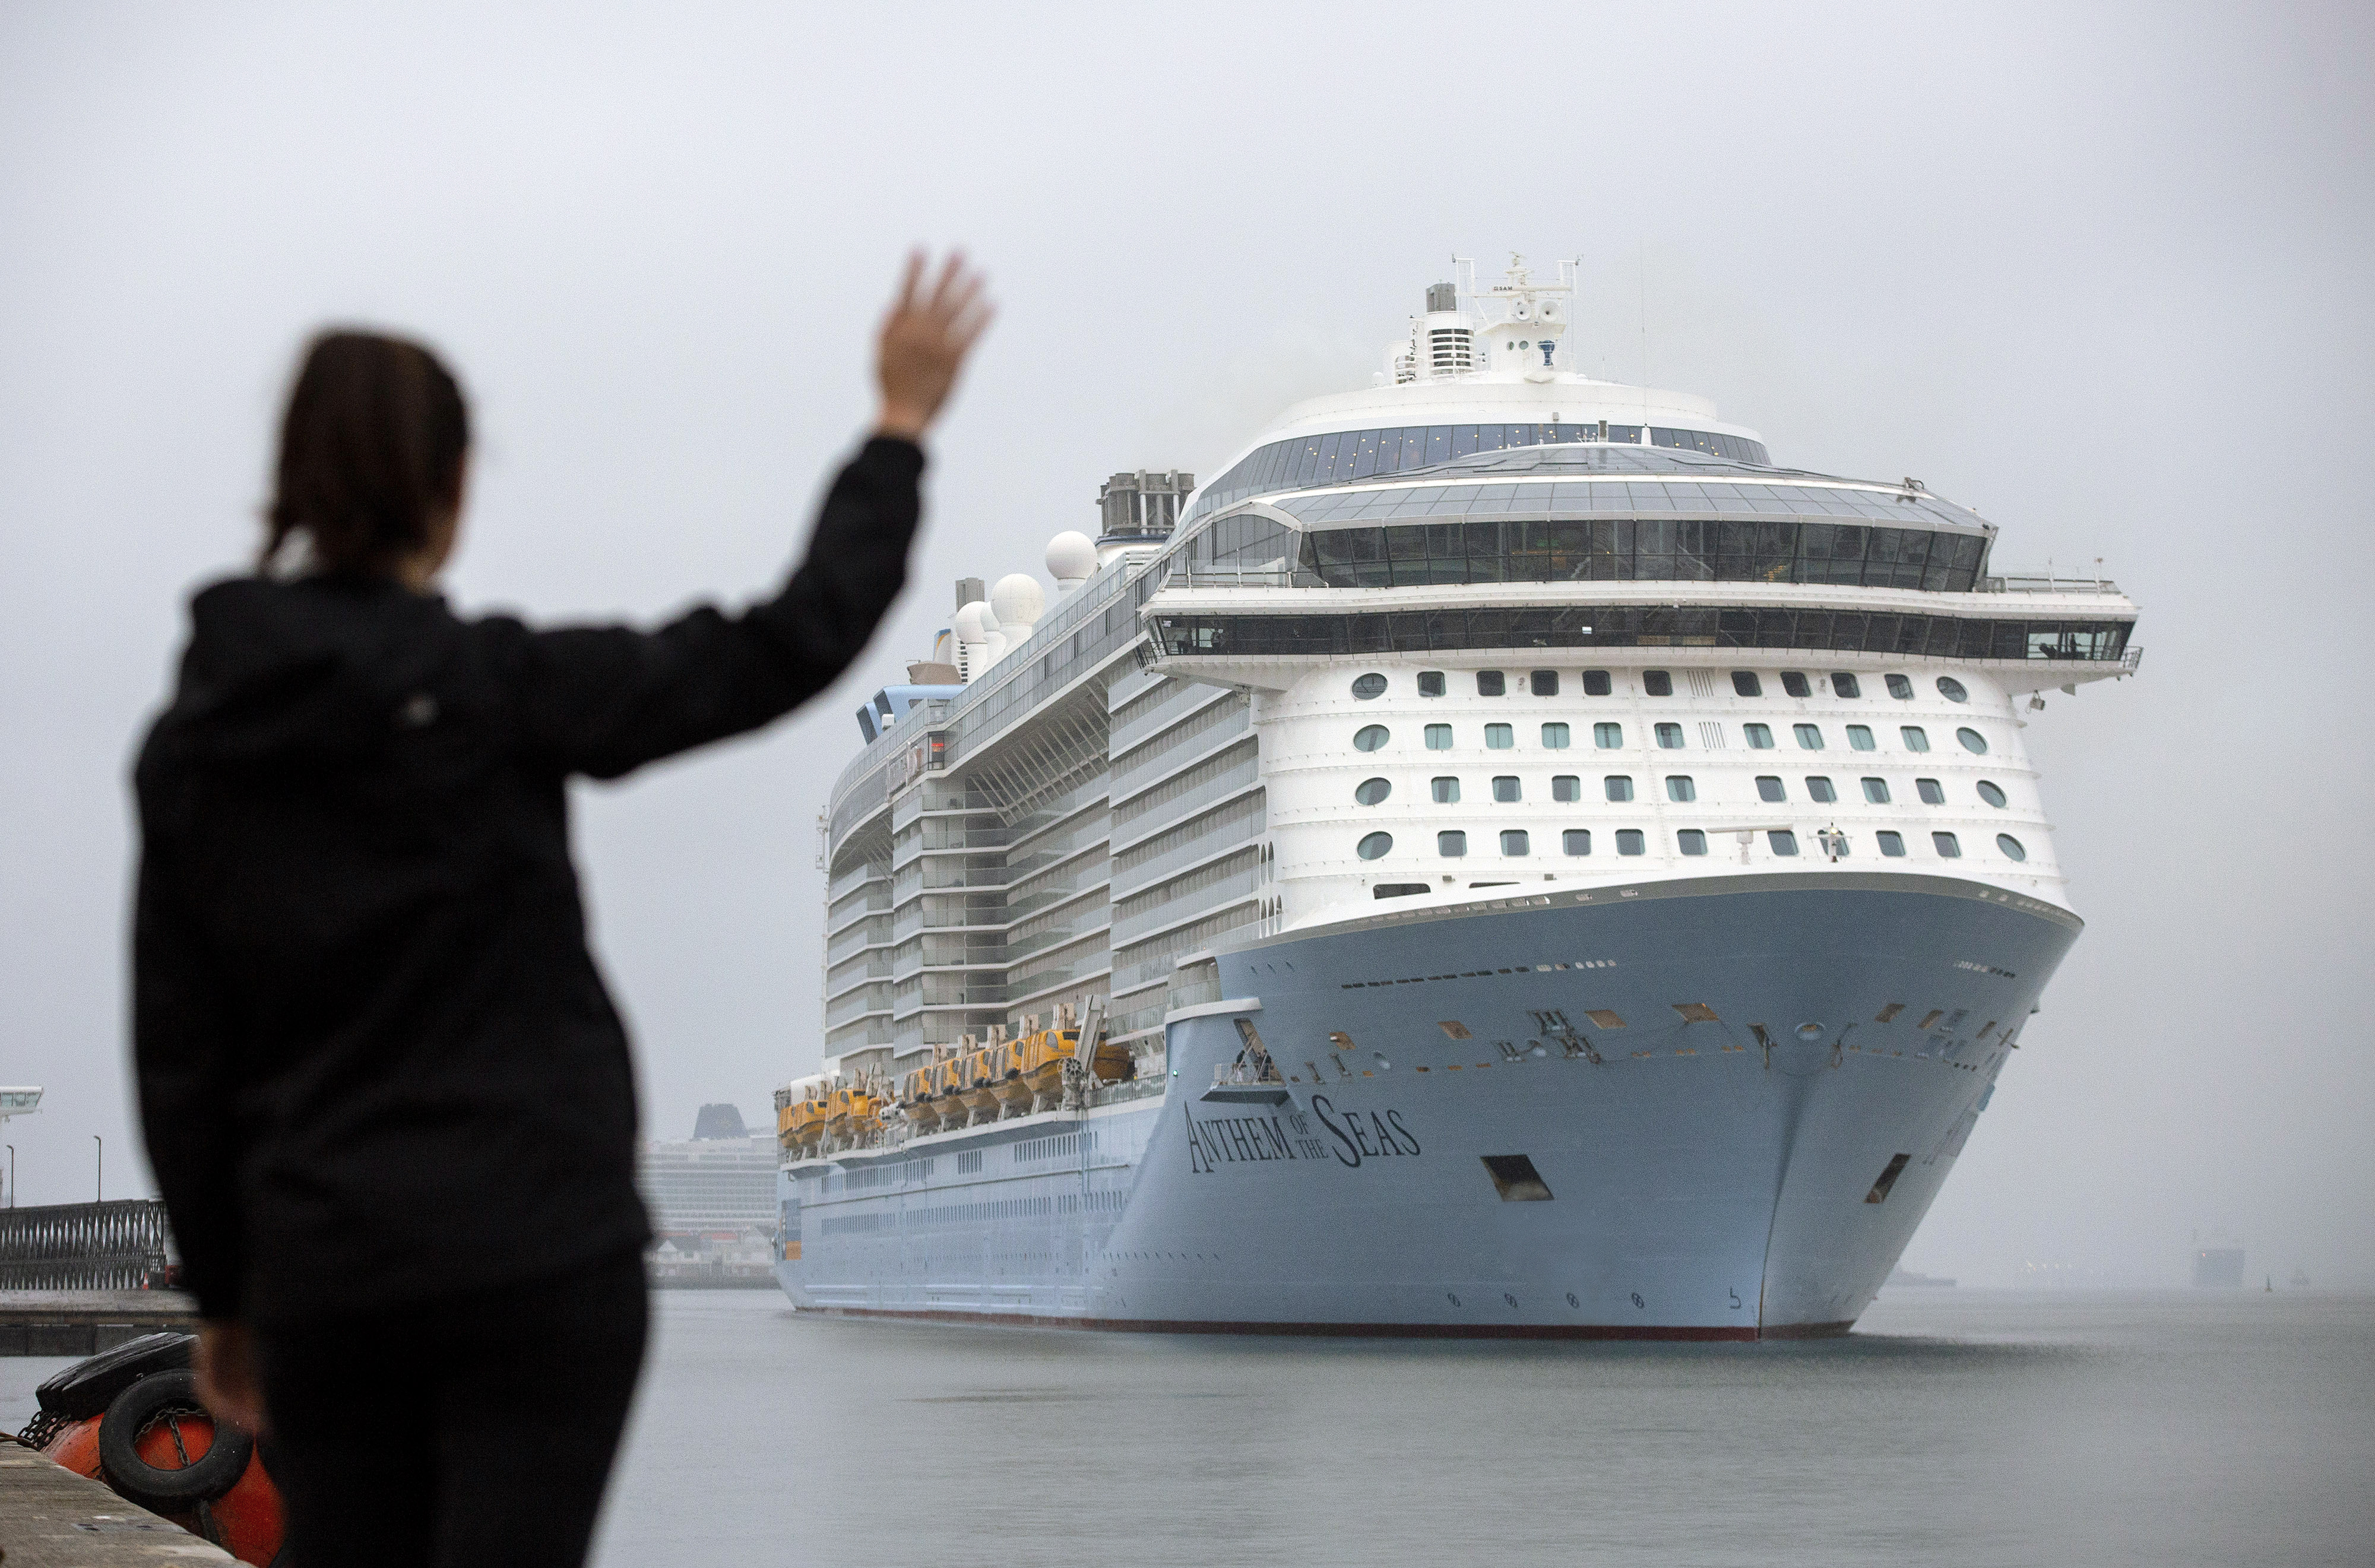  Anthem of the Seas has arrived at Southampton, England 